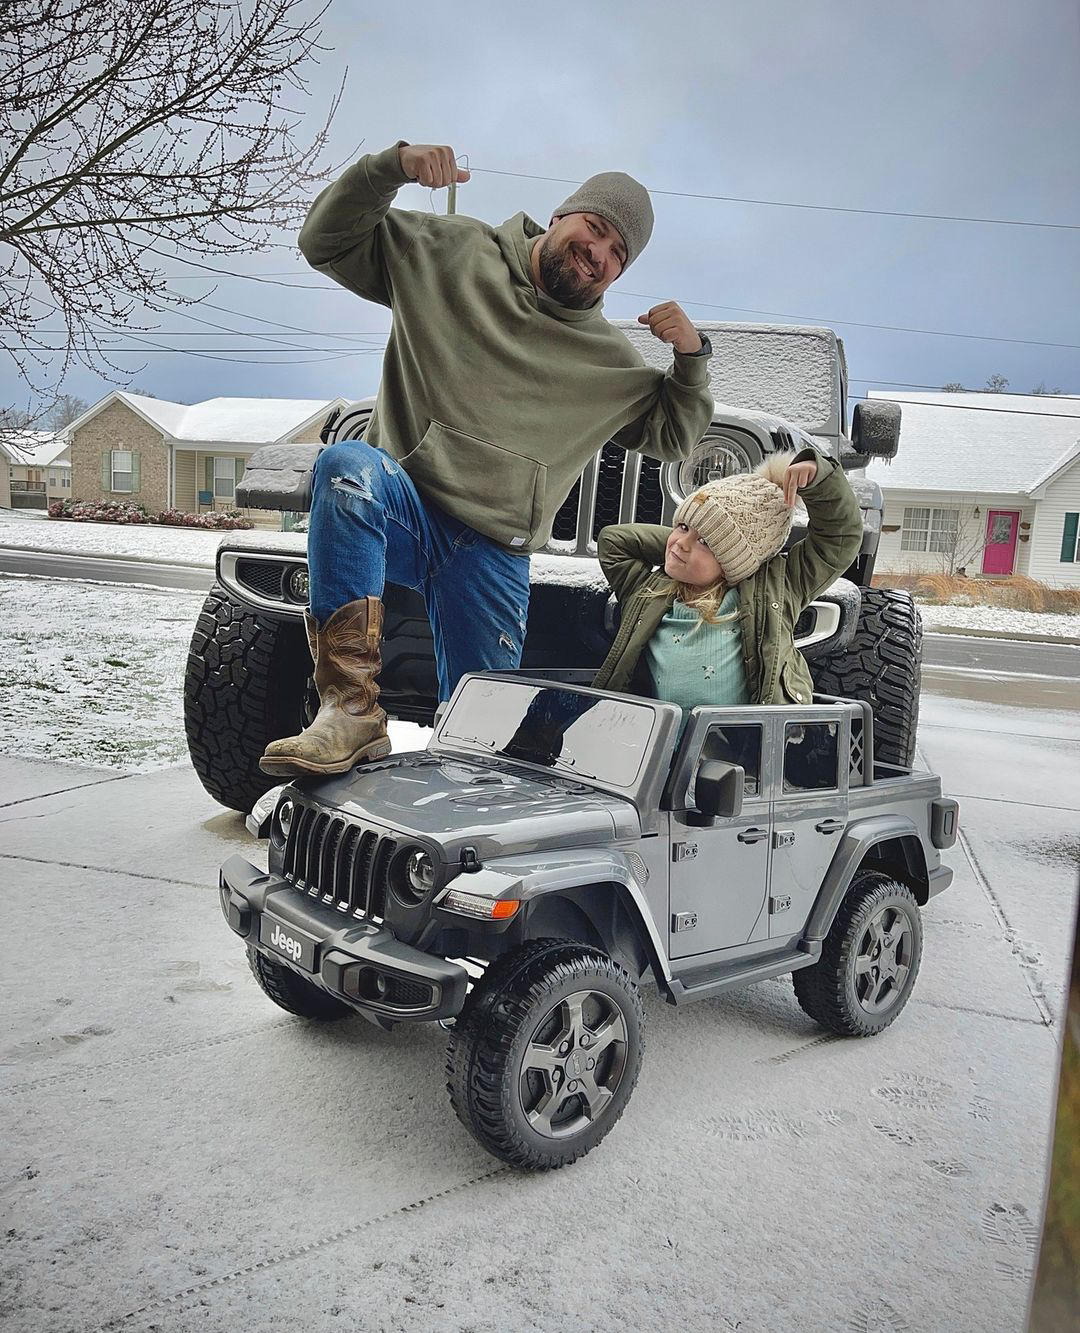 image  1 #JeepLove in every size